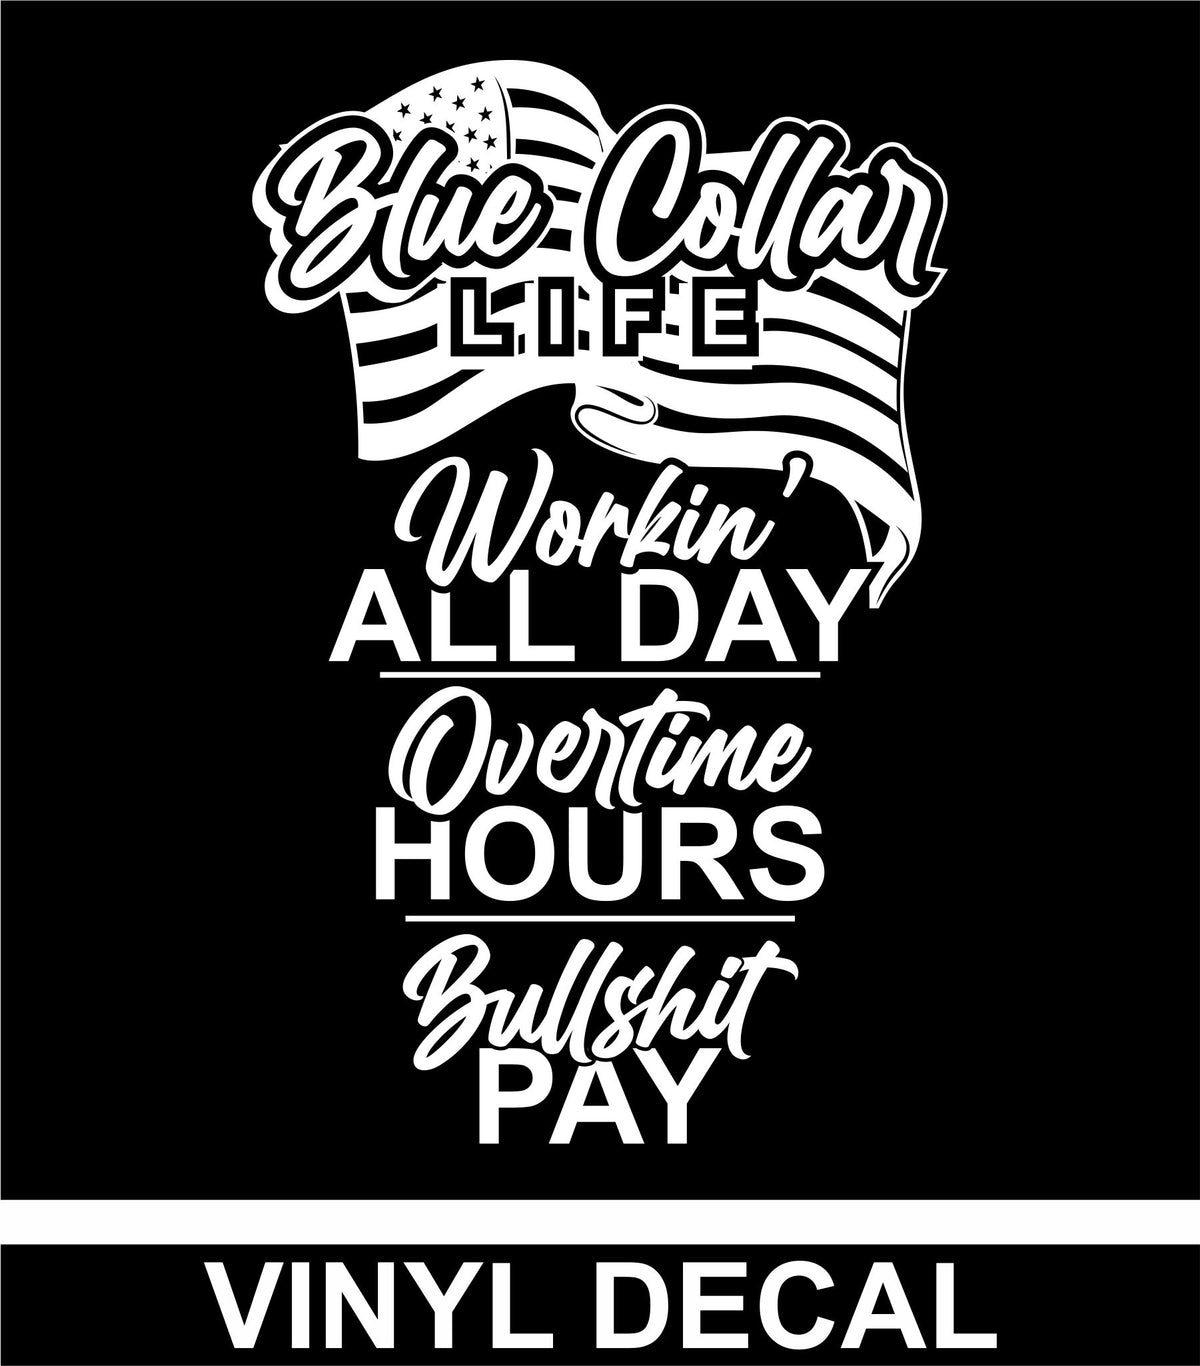 Blue Collar Life - Workin' All Day - Overtime Pay - Vinyl Decal - Free Shipping